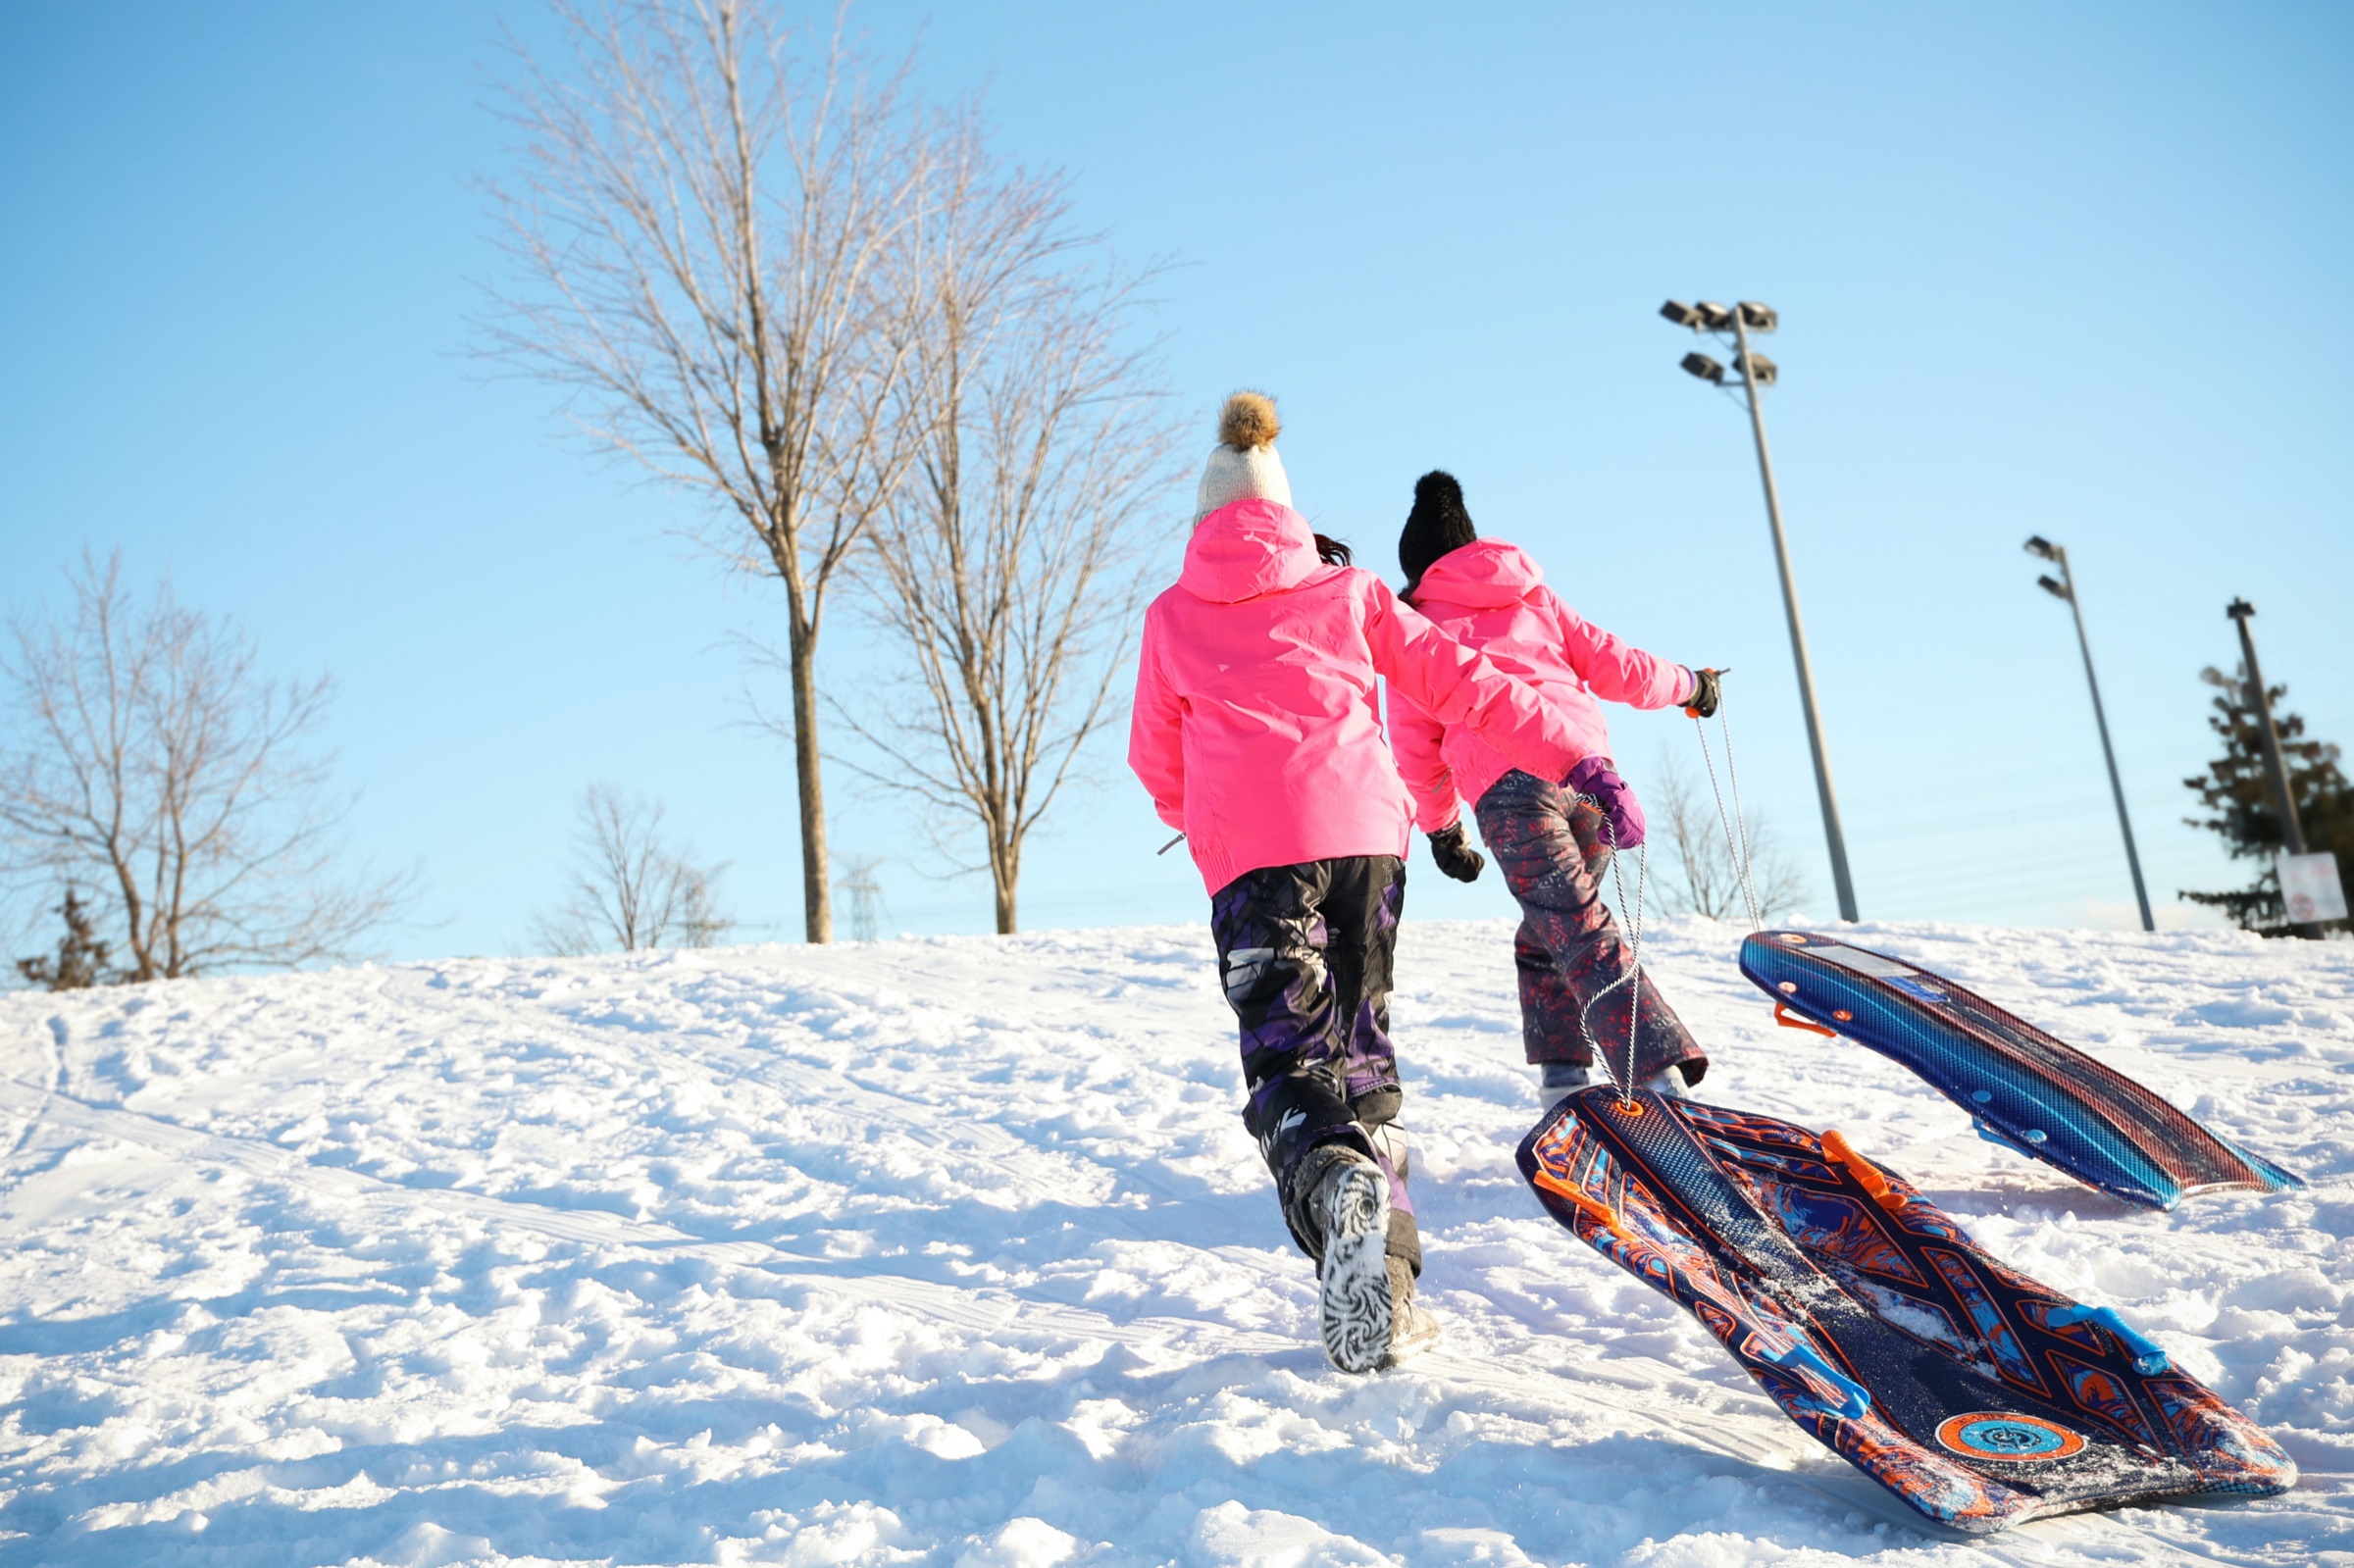 Two people run up a snowy hill with their sleds.